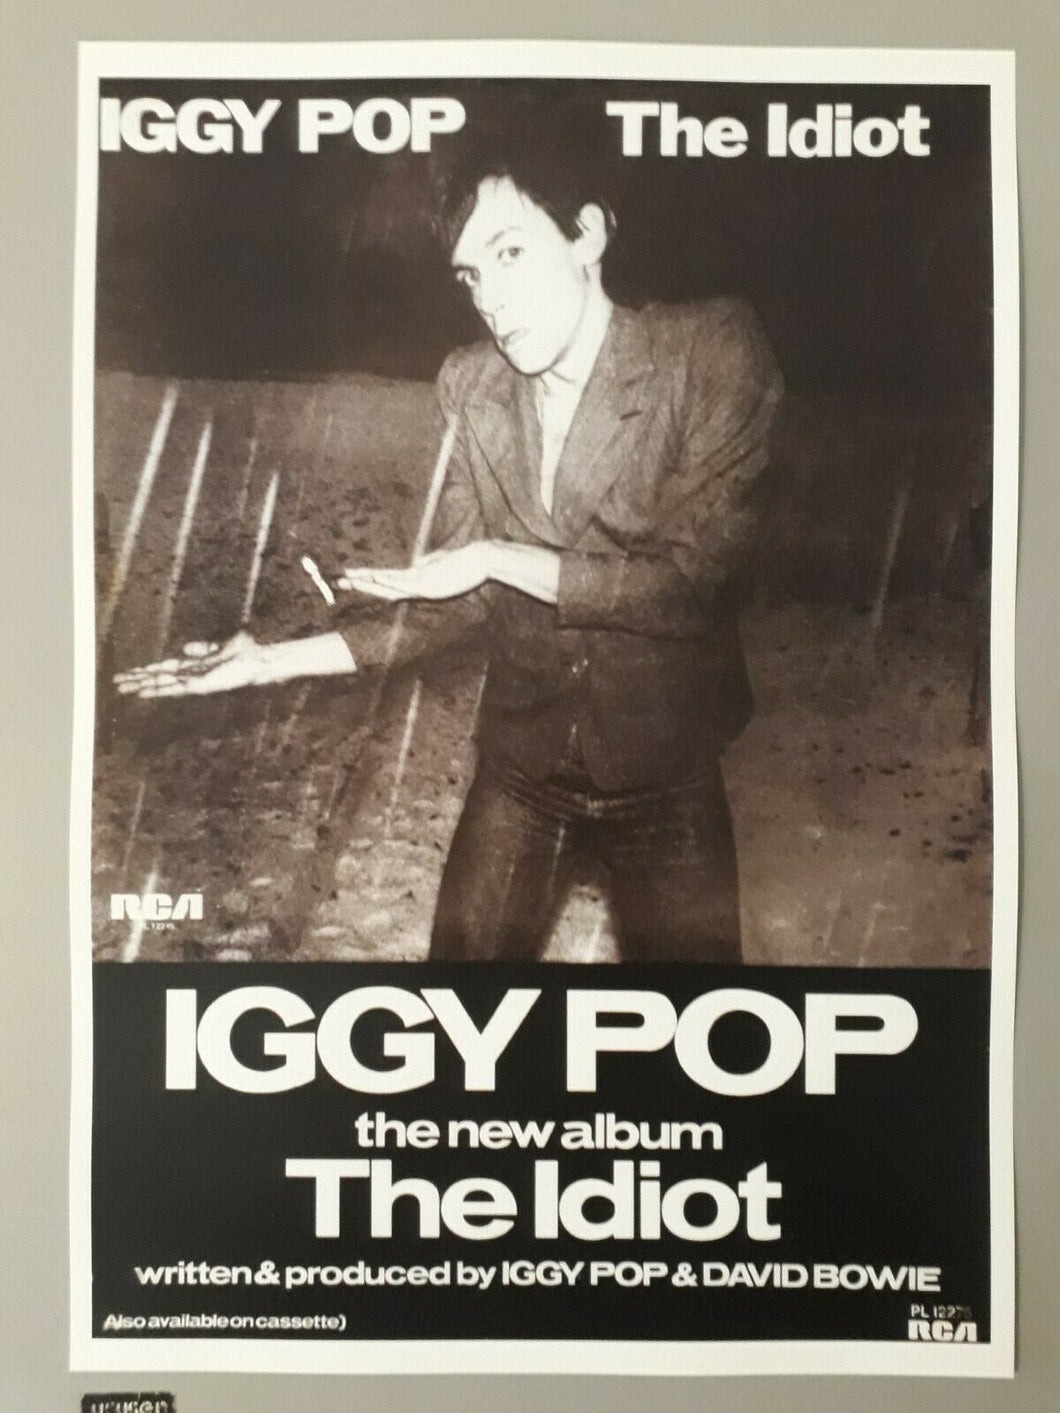 Iggy Pop poster - The Idiot promo & David Bowie RCA 1977 new reprint edition A3 - Original Music and Movie Posters for sale from Bamalama - Online Poster Store UK London